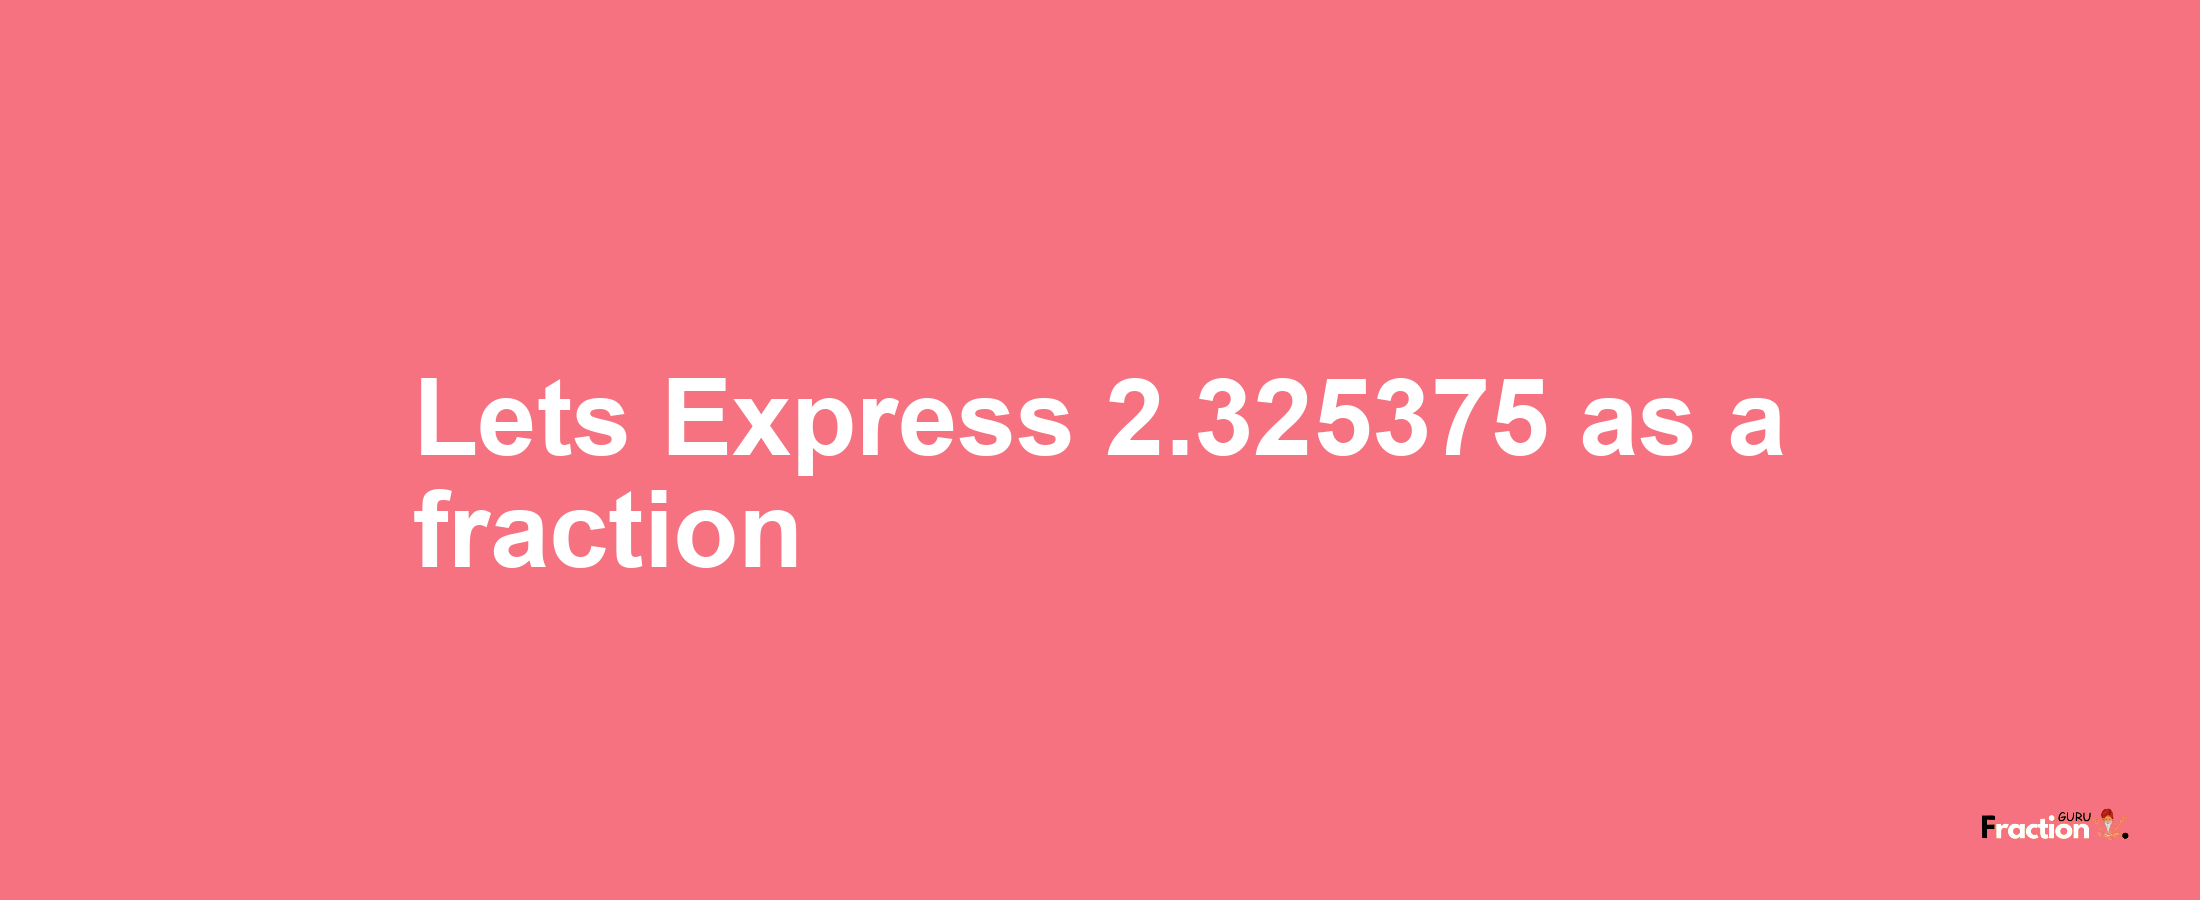 Lets Express 2.325375 as afraction